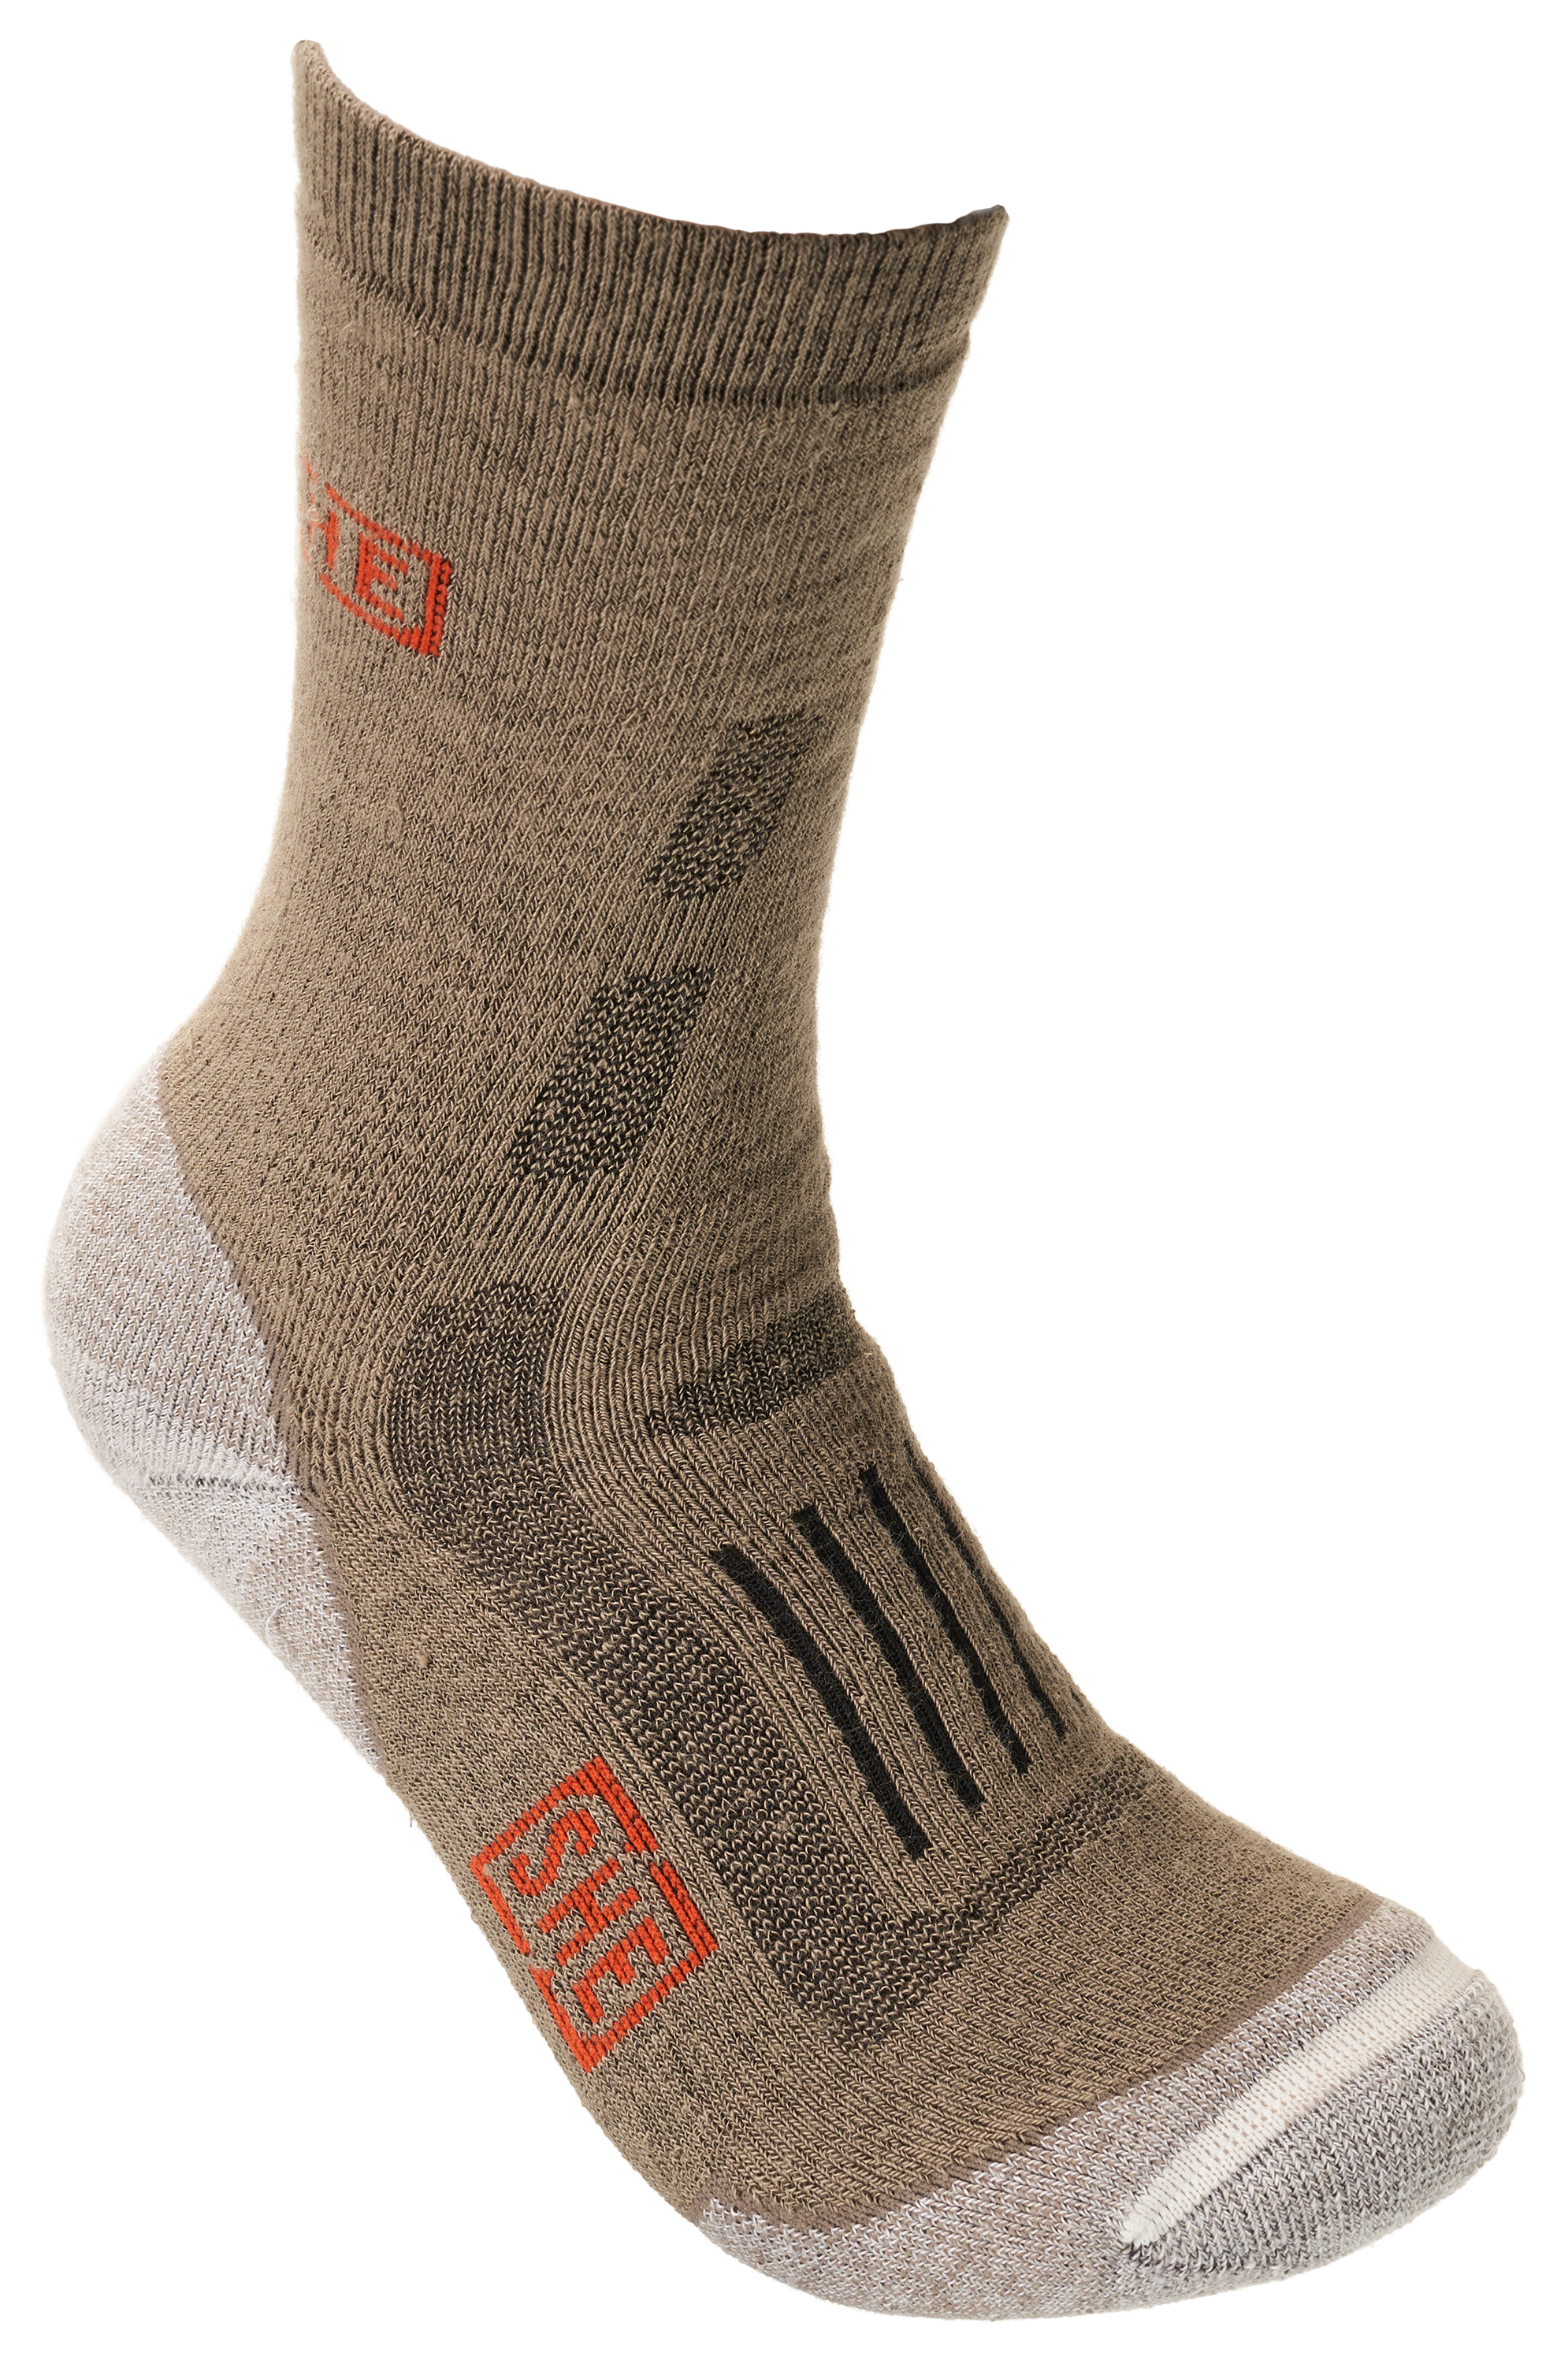 SHE Outdoor Pro Team Trekker Socks with Scent Control for Ladies